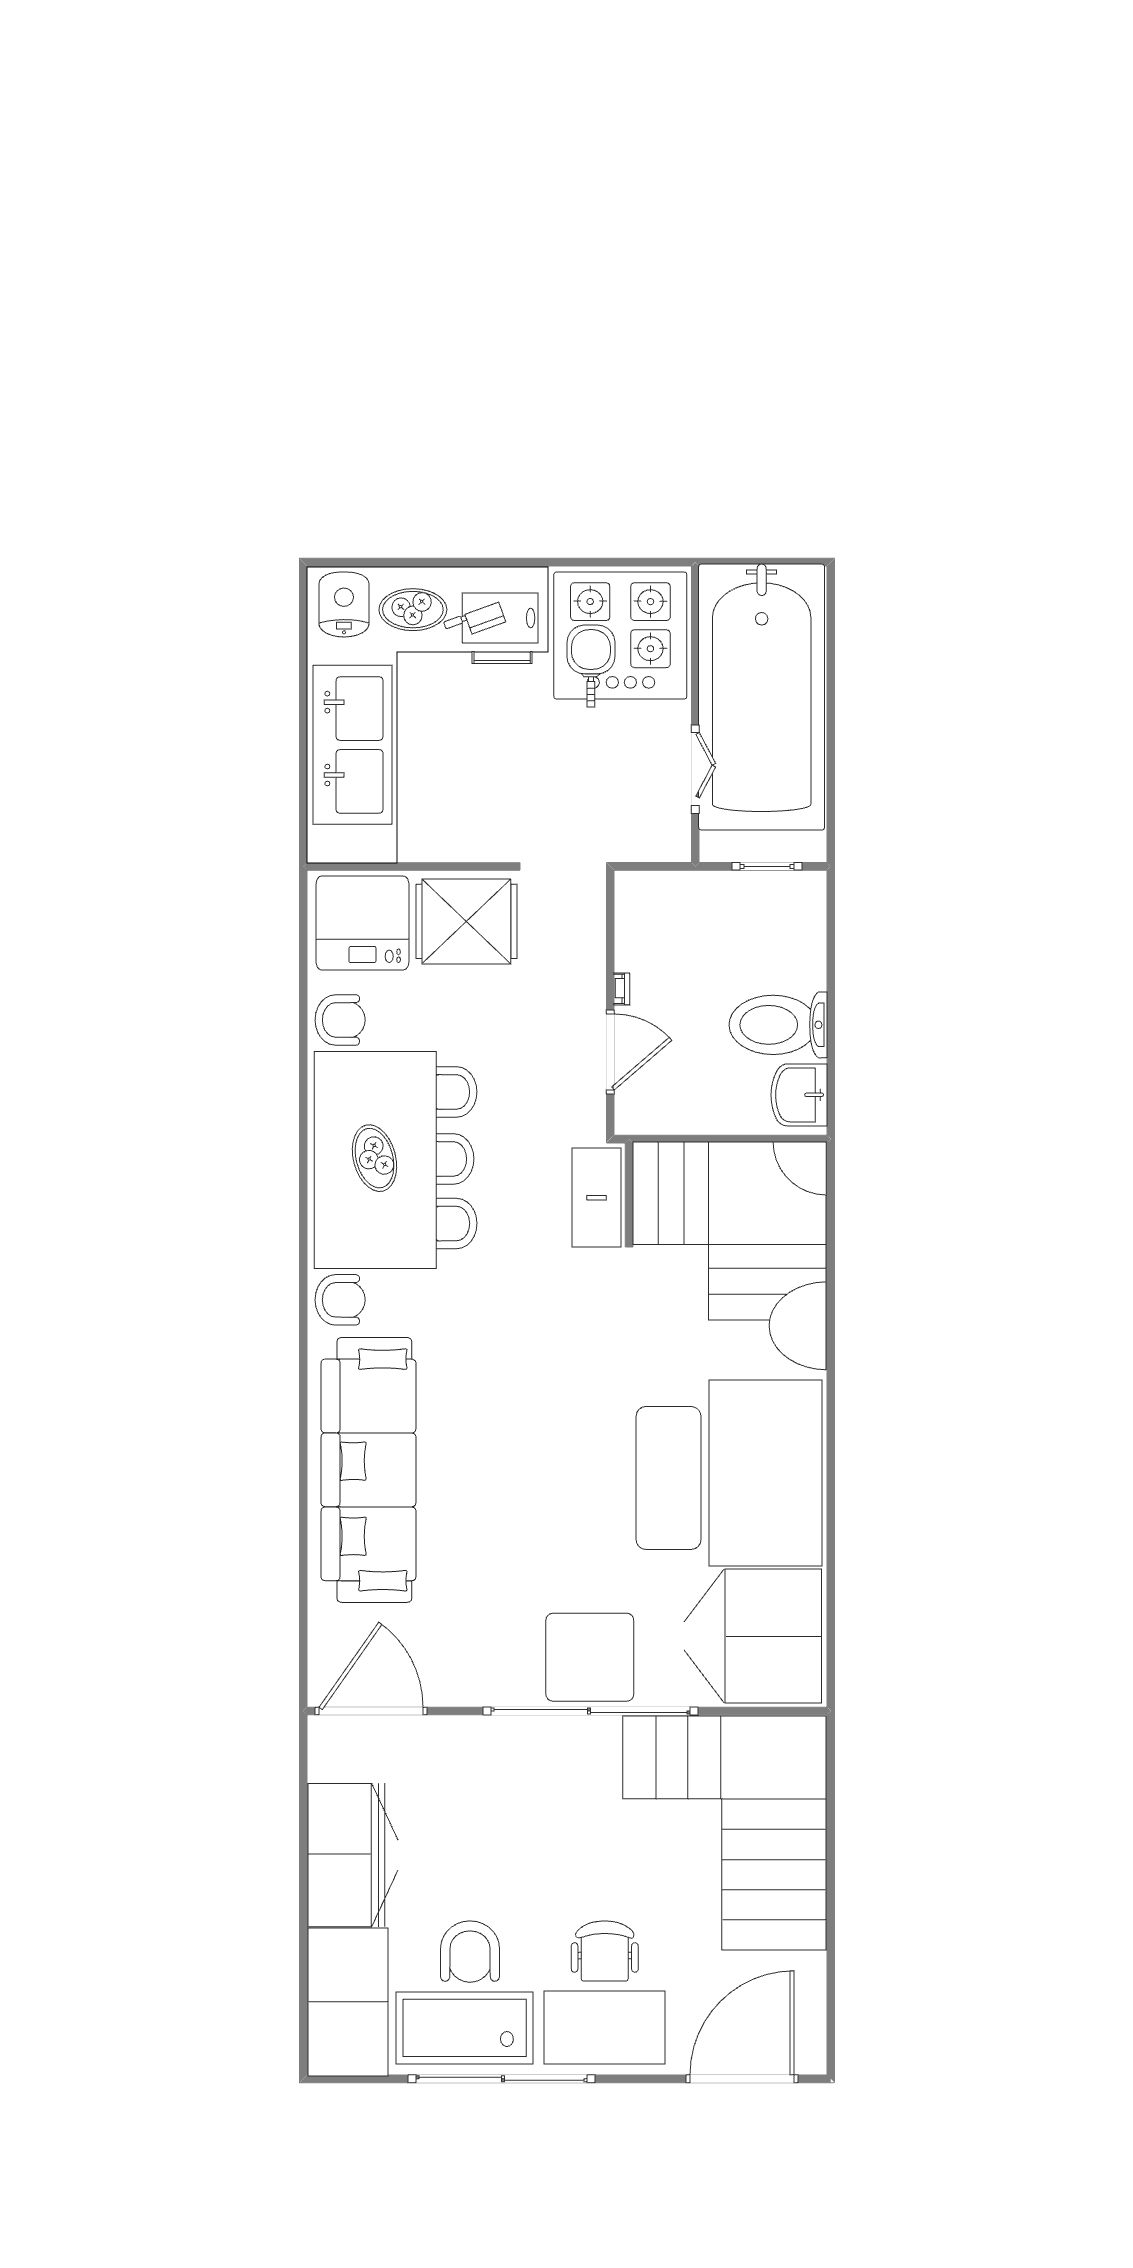 Home Plan Design With Bedroom and Restoom